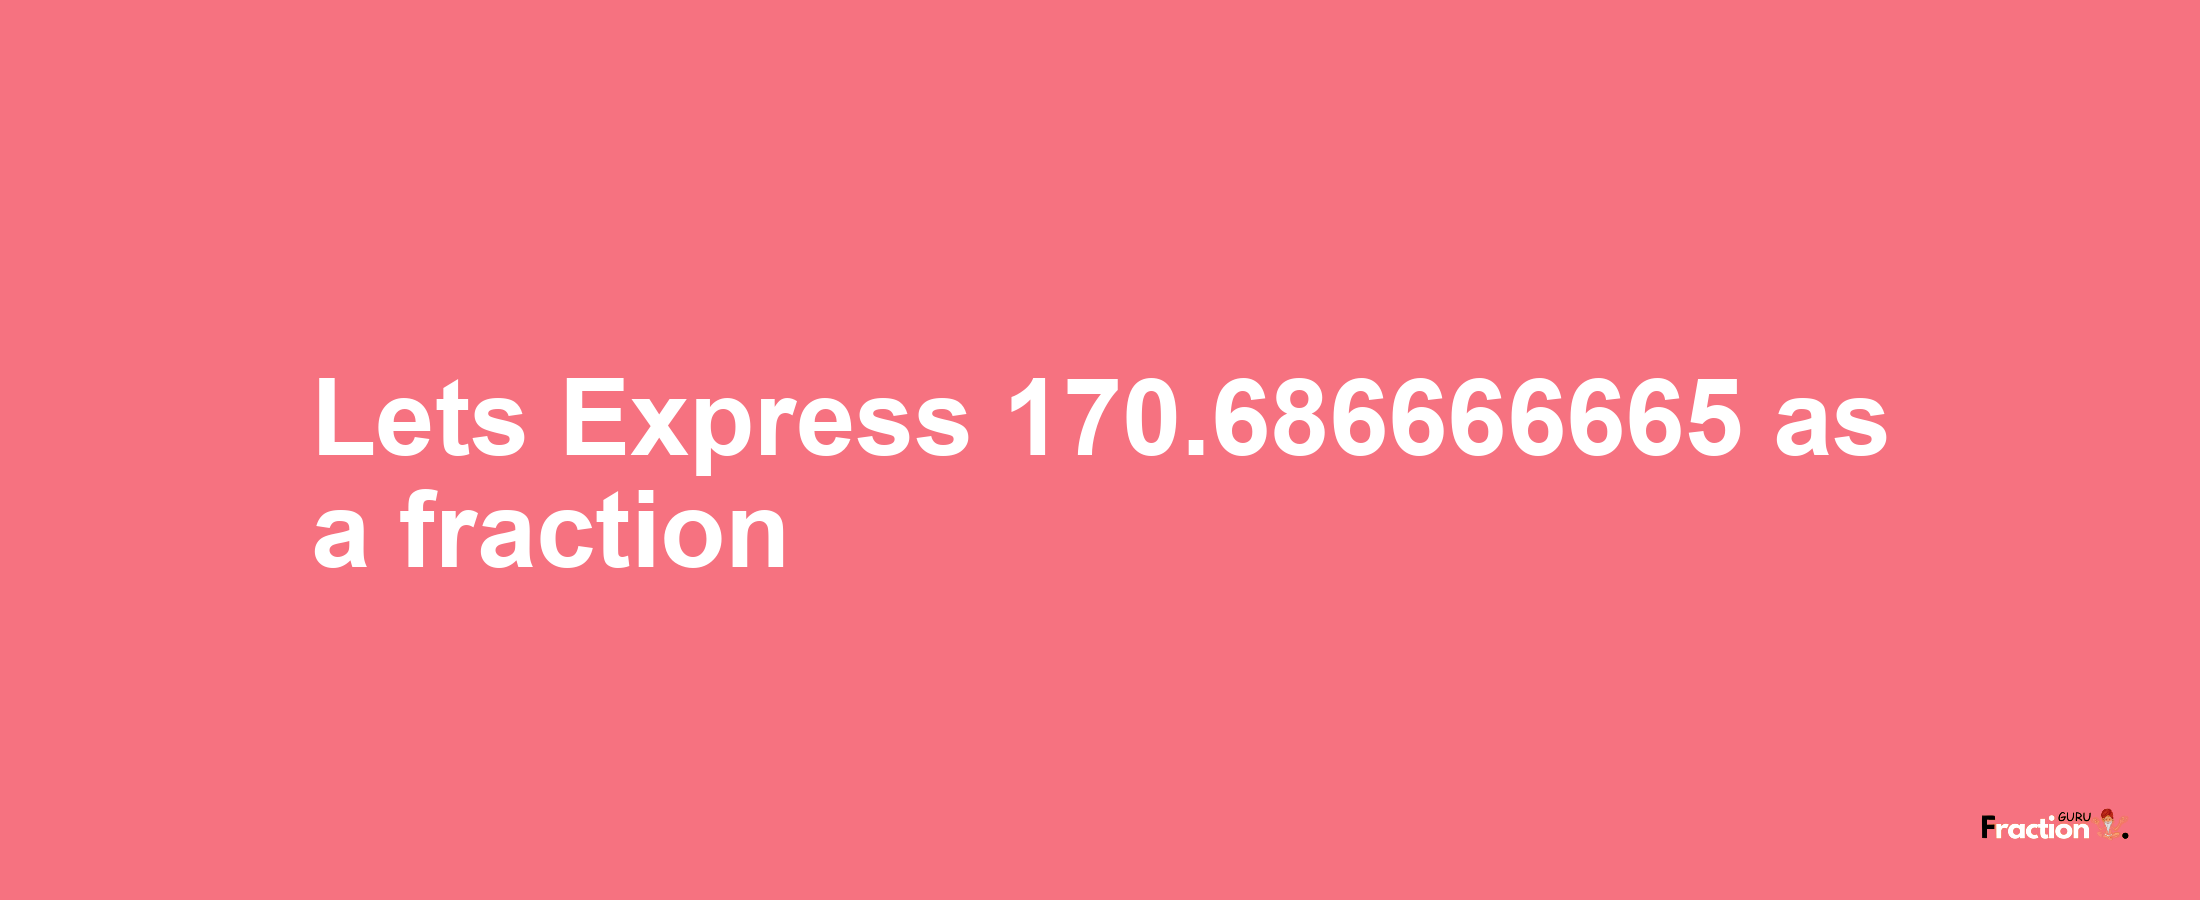 Lets Express 170.686666665 as afraction